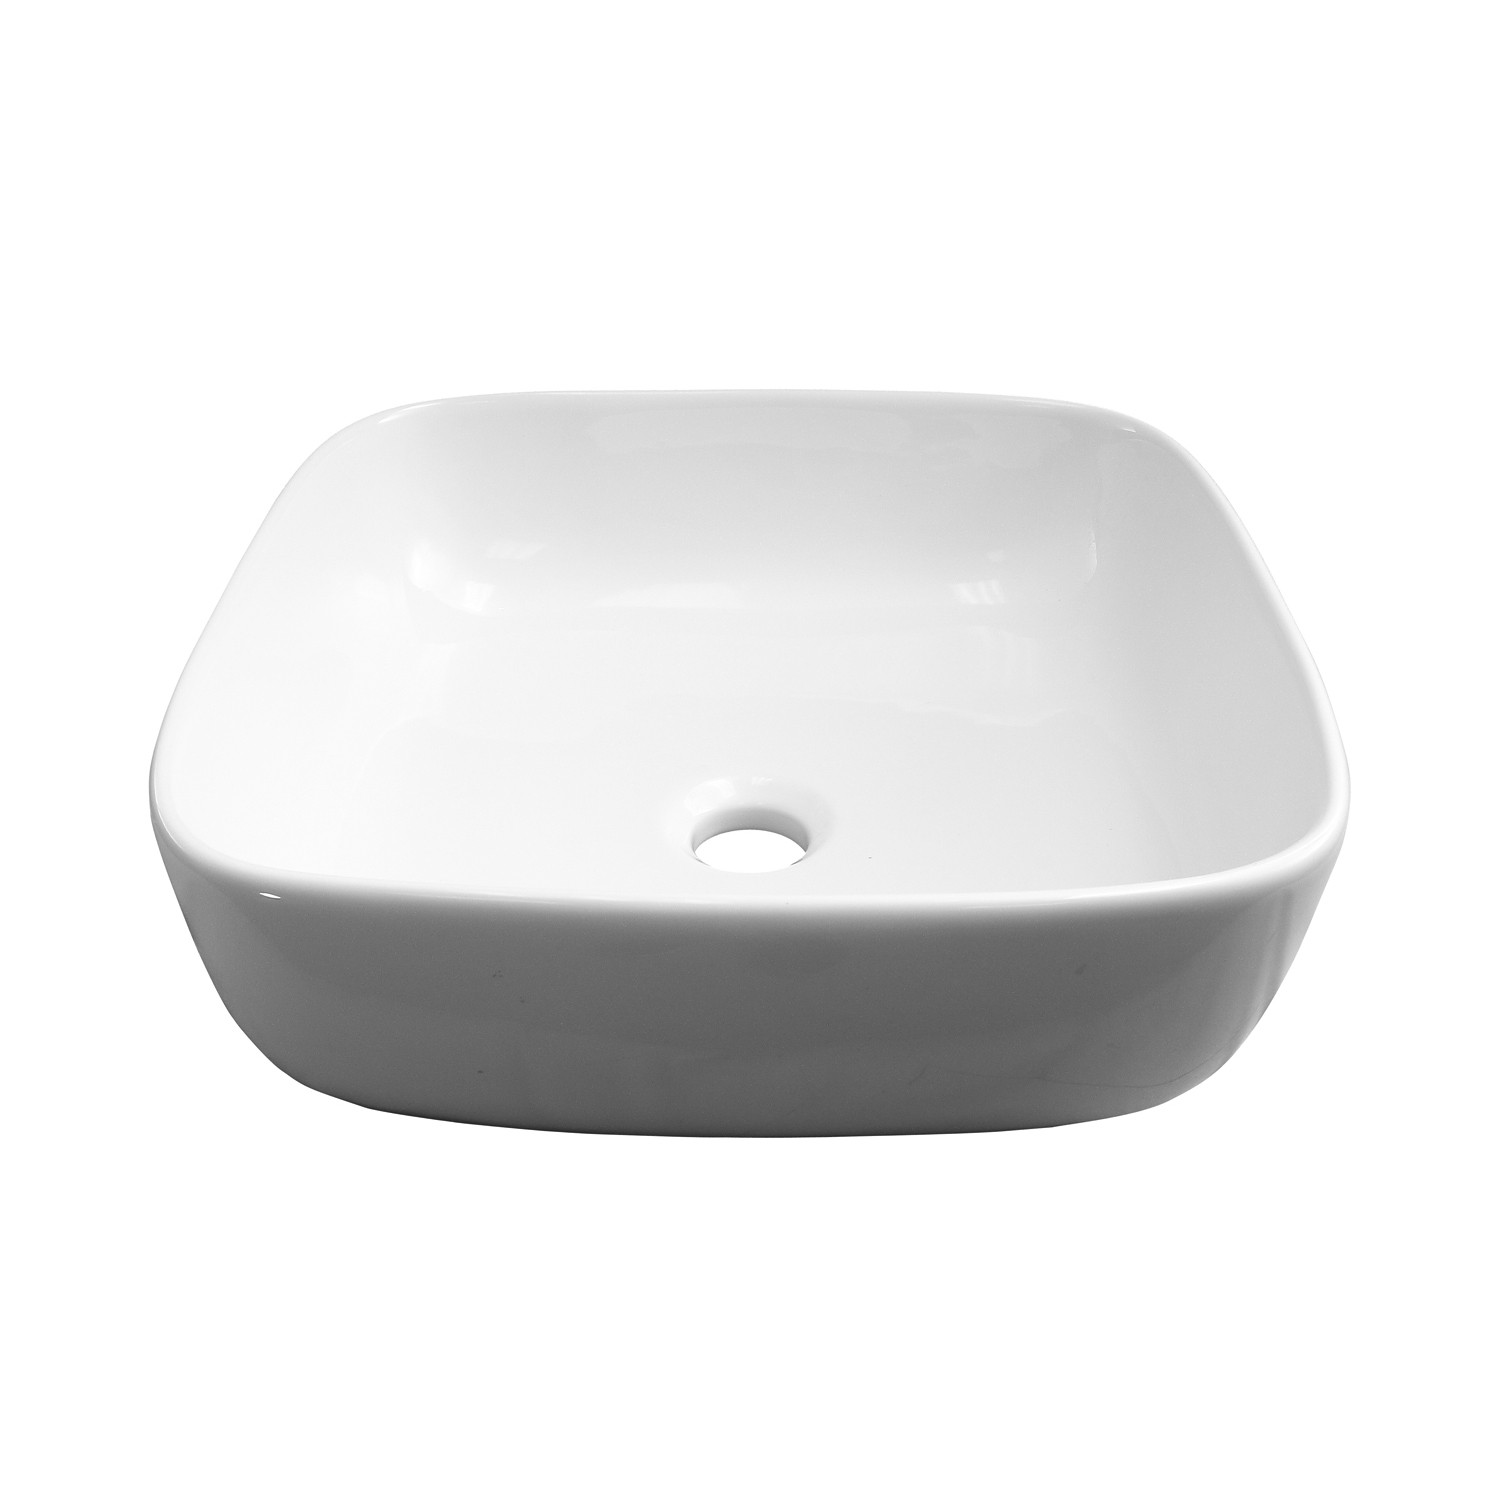 BARCLAY 4-8042WH MENTONE 15 3/4 INCH SINGLE BASIN ABOVE COUNTER BATHROOM SINK - WHITE